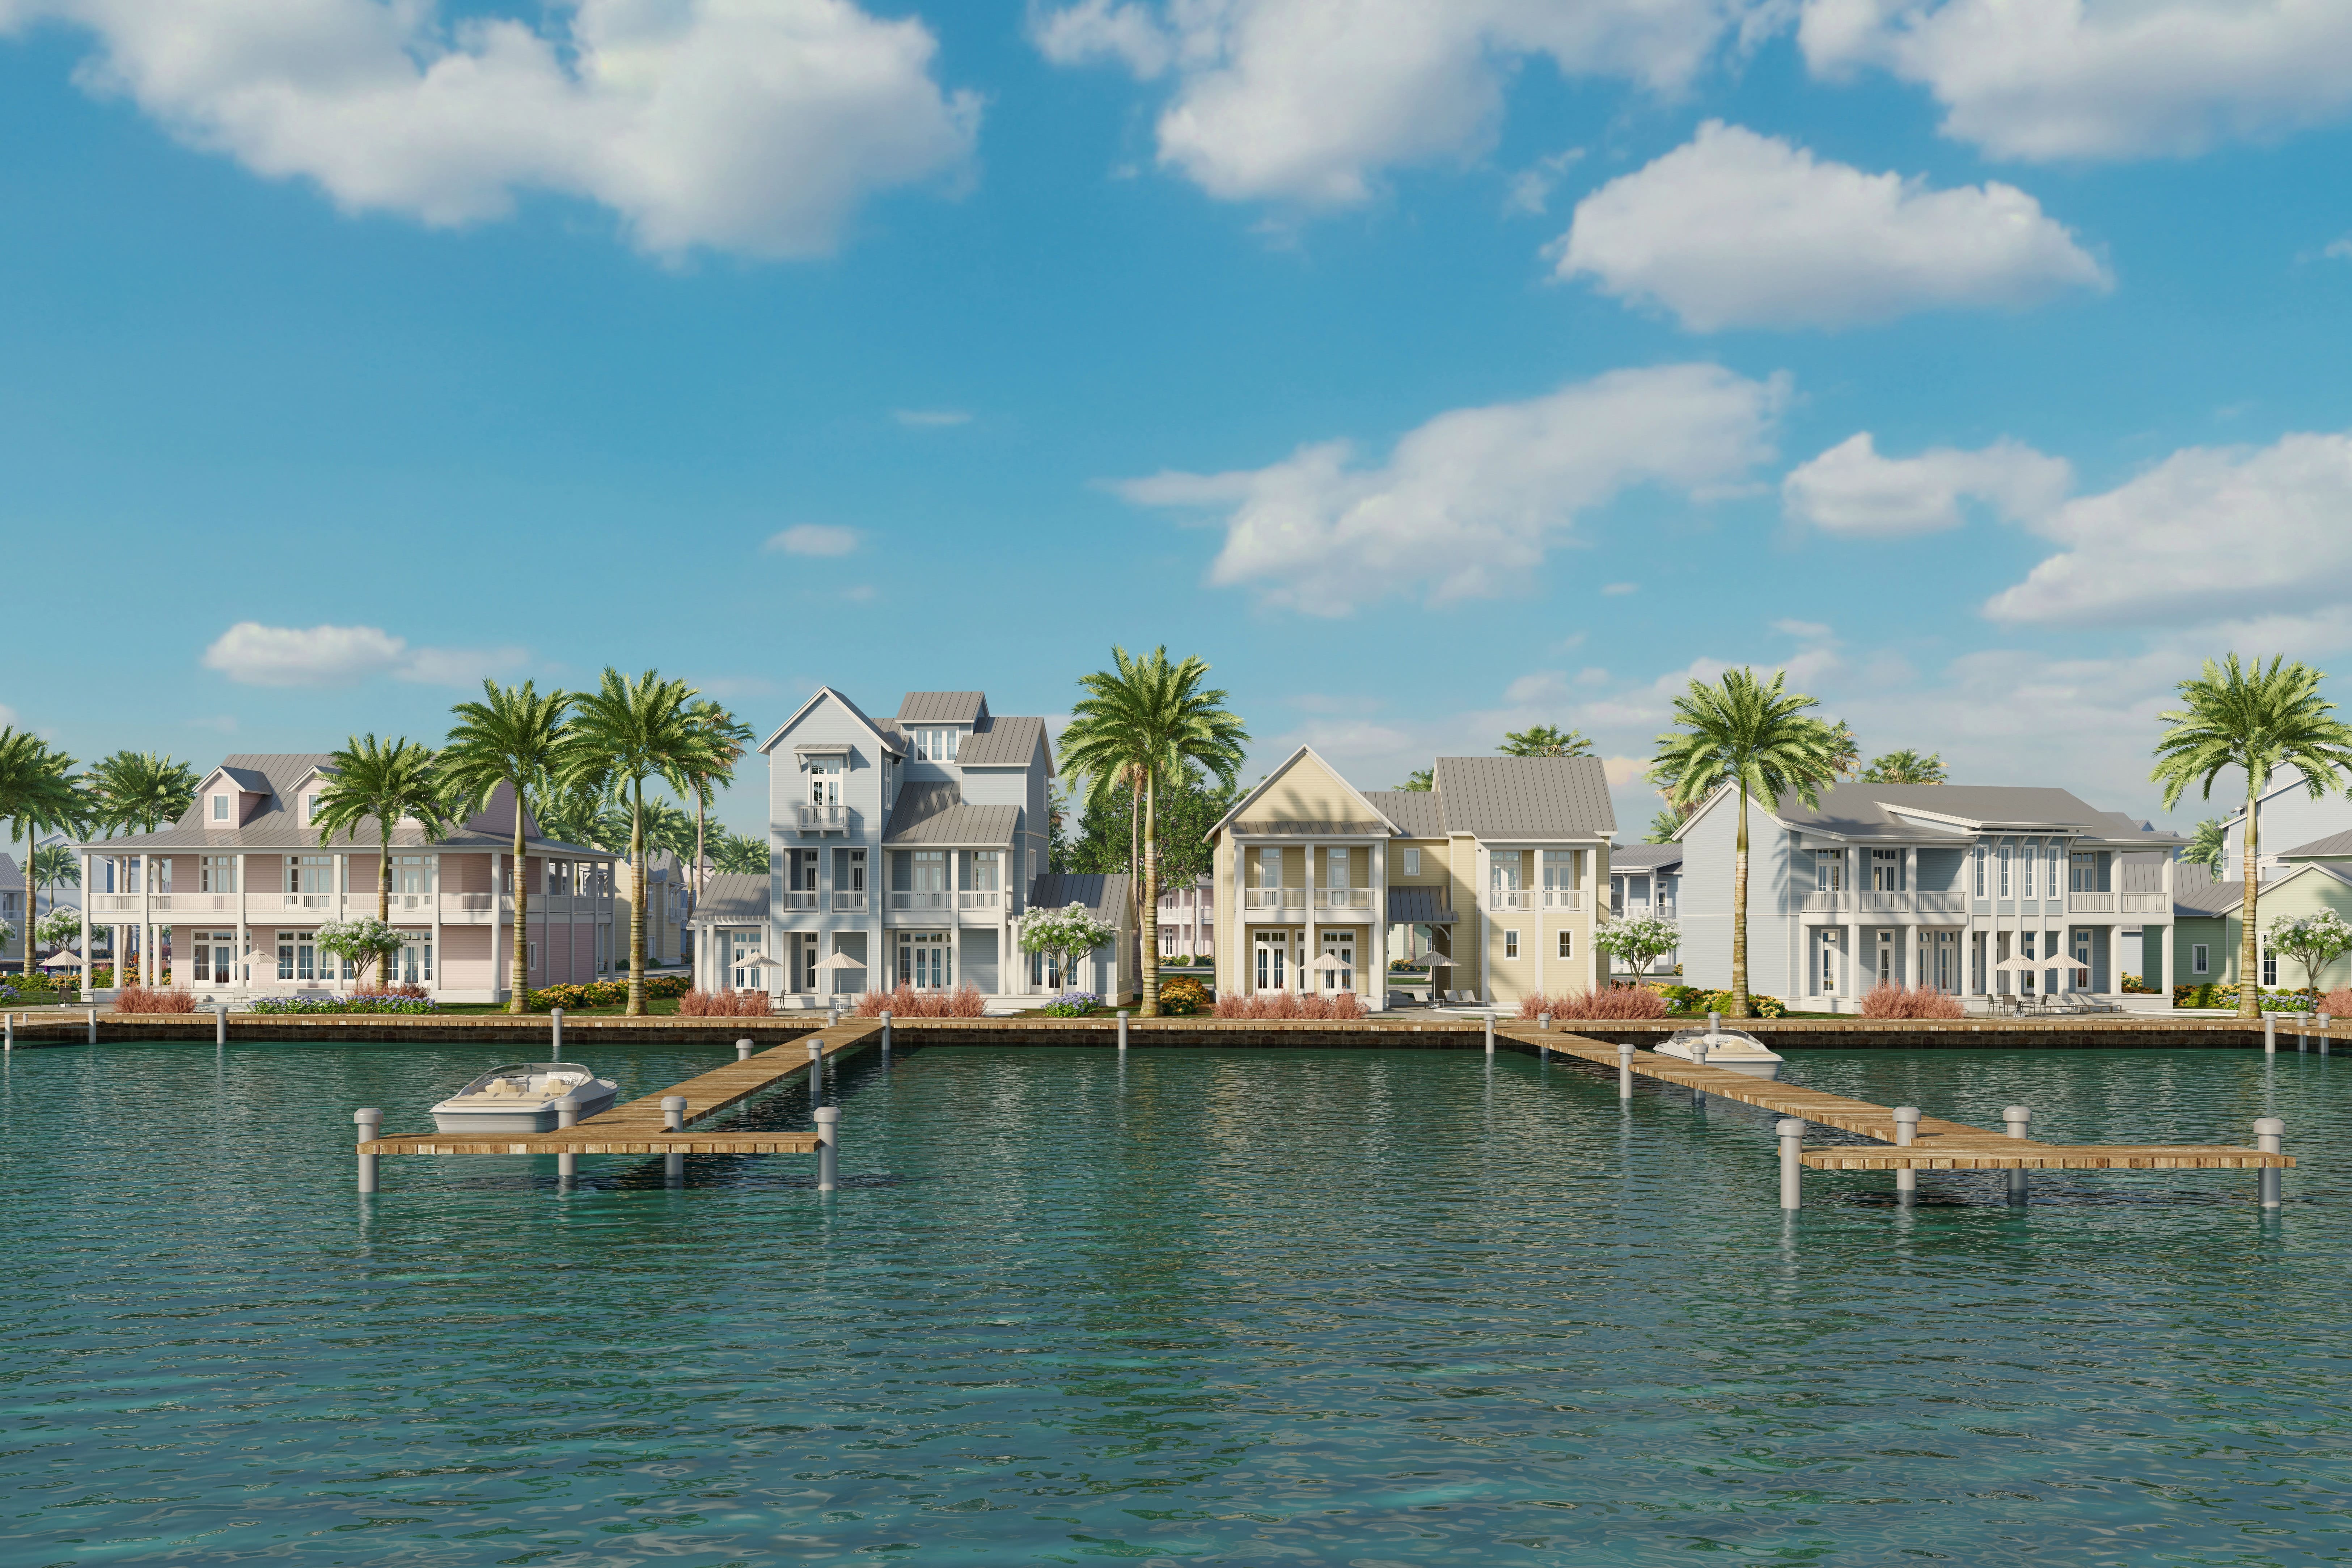 Waterfront homes and docks in Rockport, TX